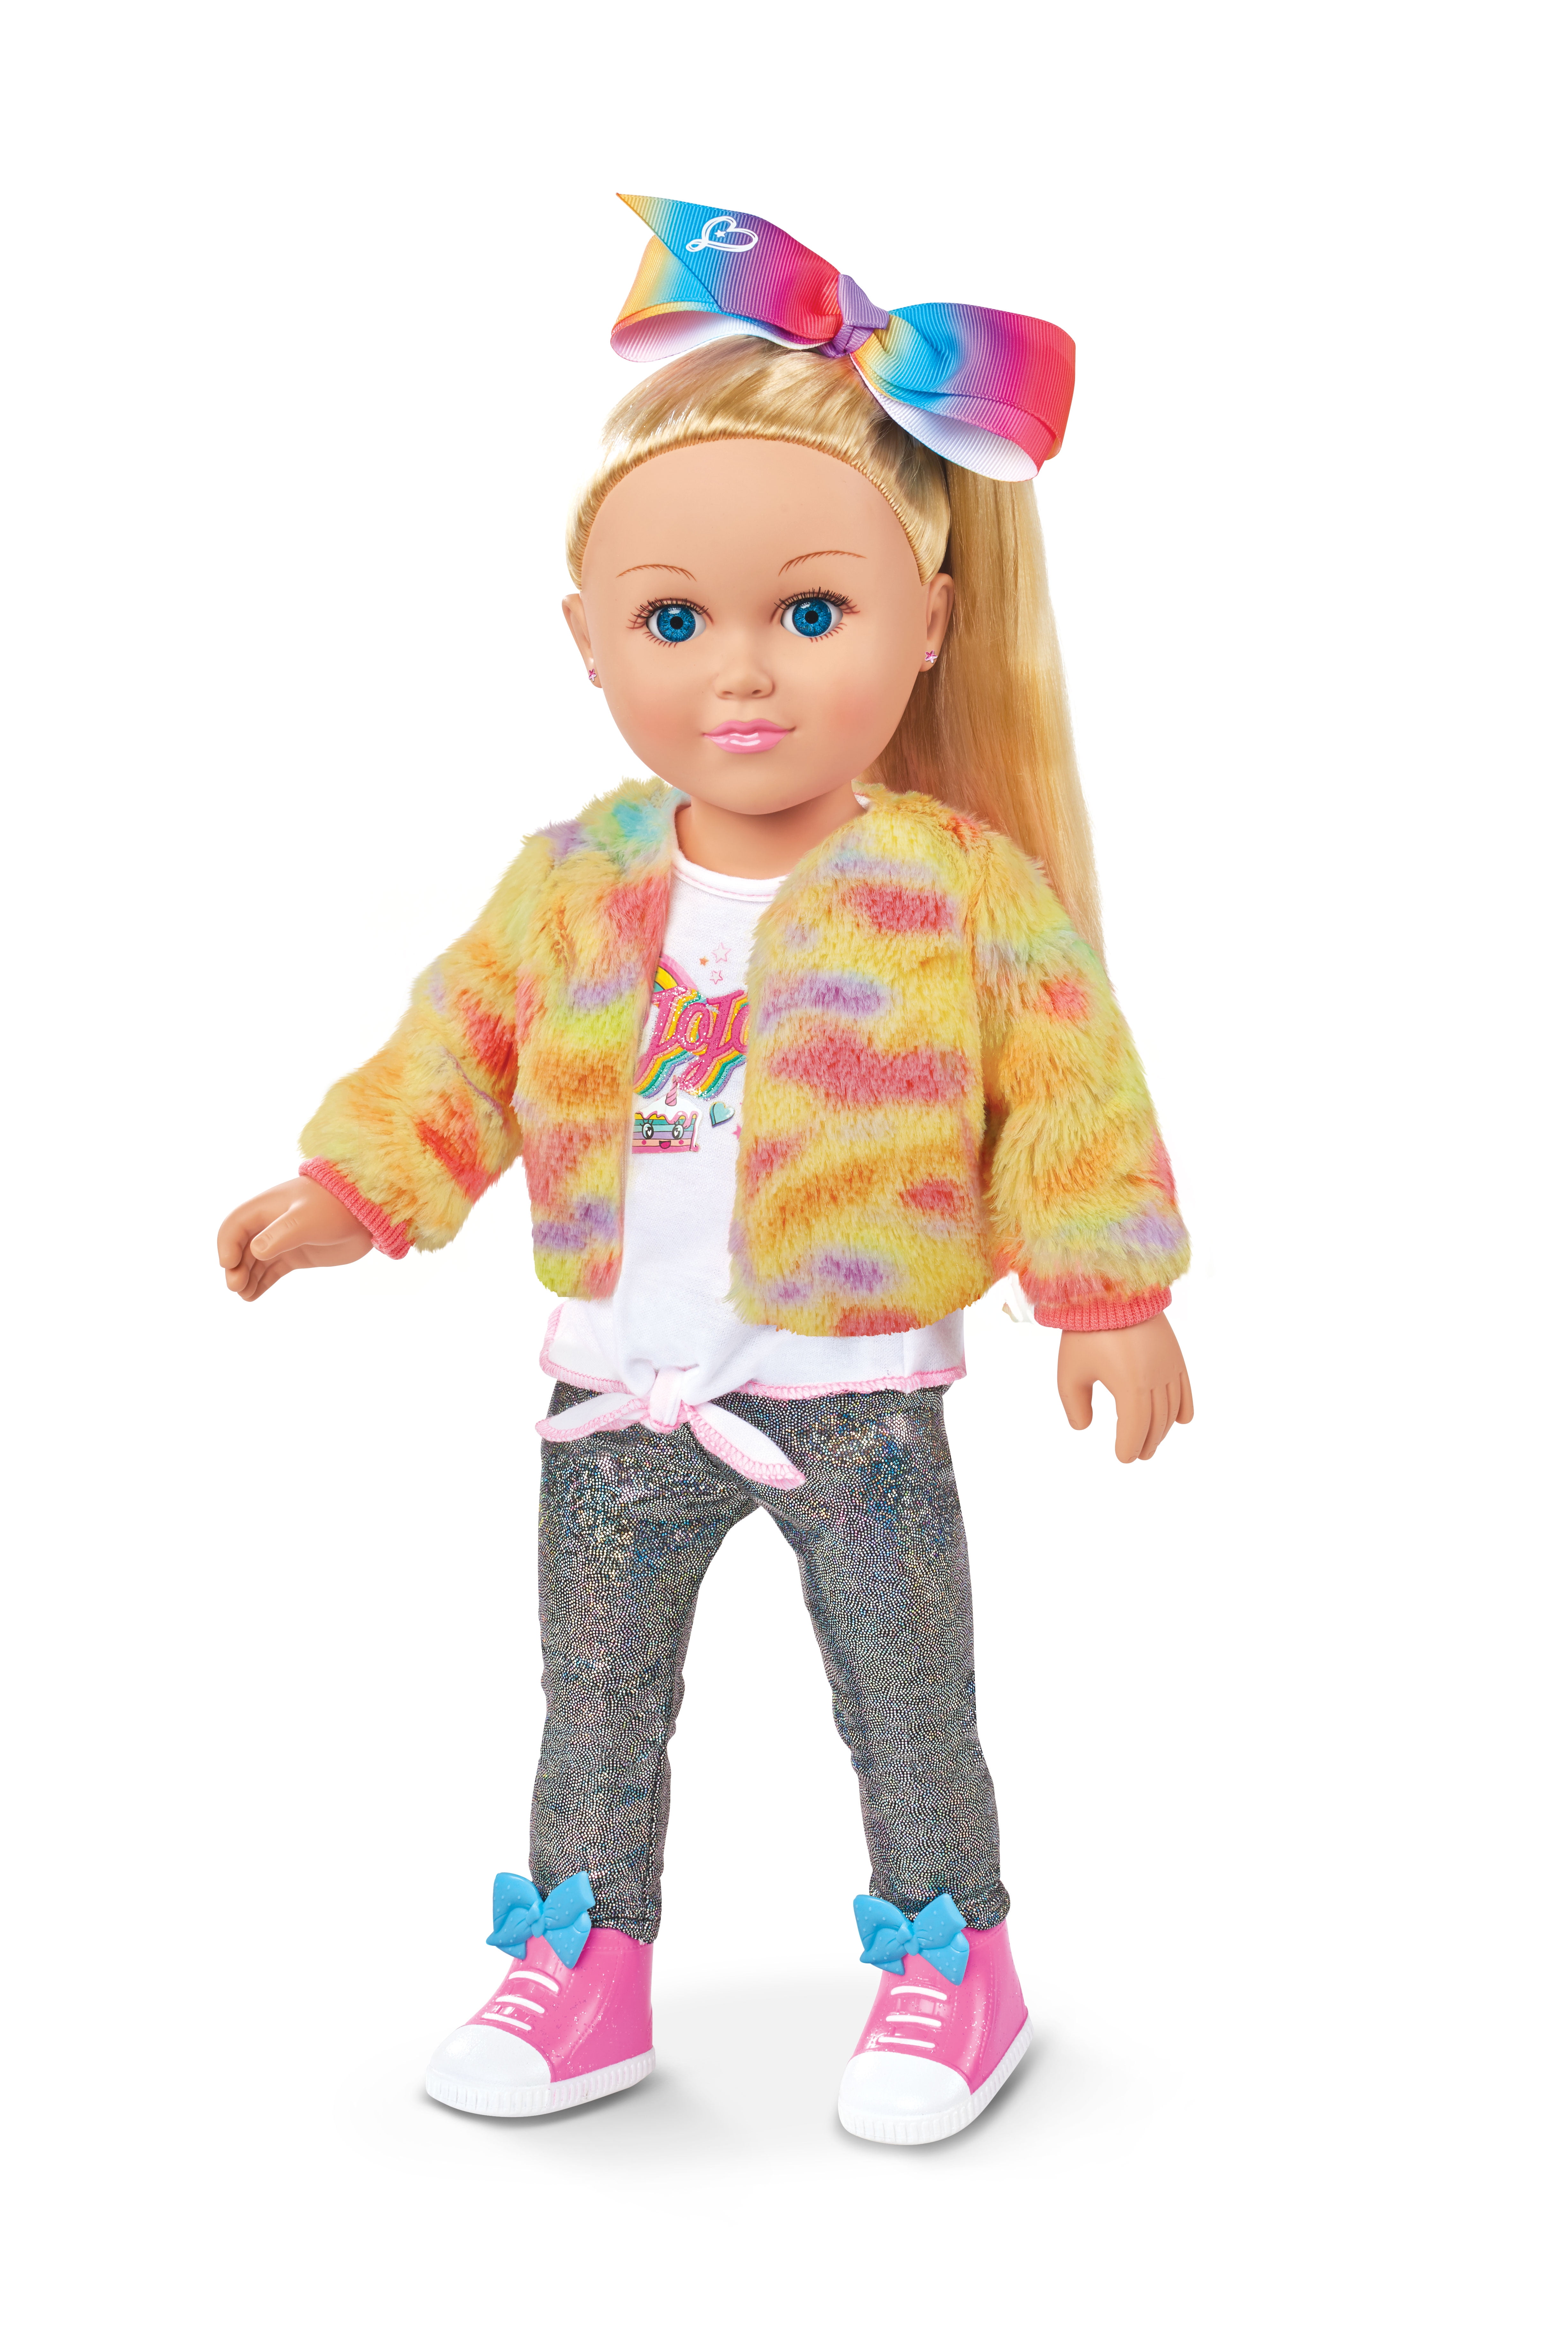 Phrases and Sounds Details about   Baby Alive Baby Go Bye Bye Black Hair Crawls New 30 